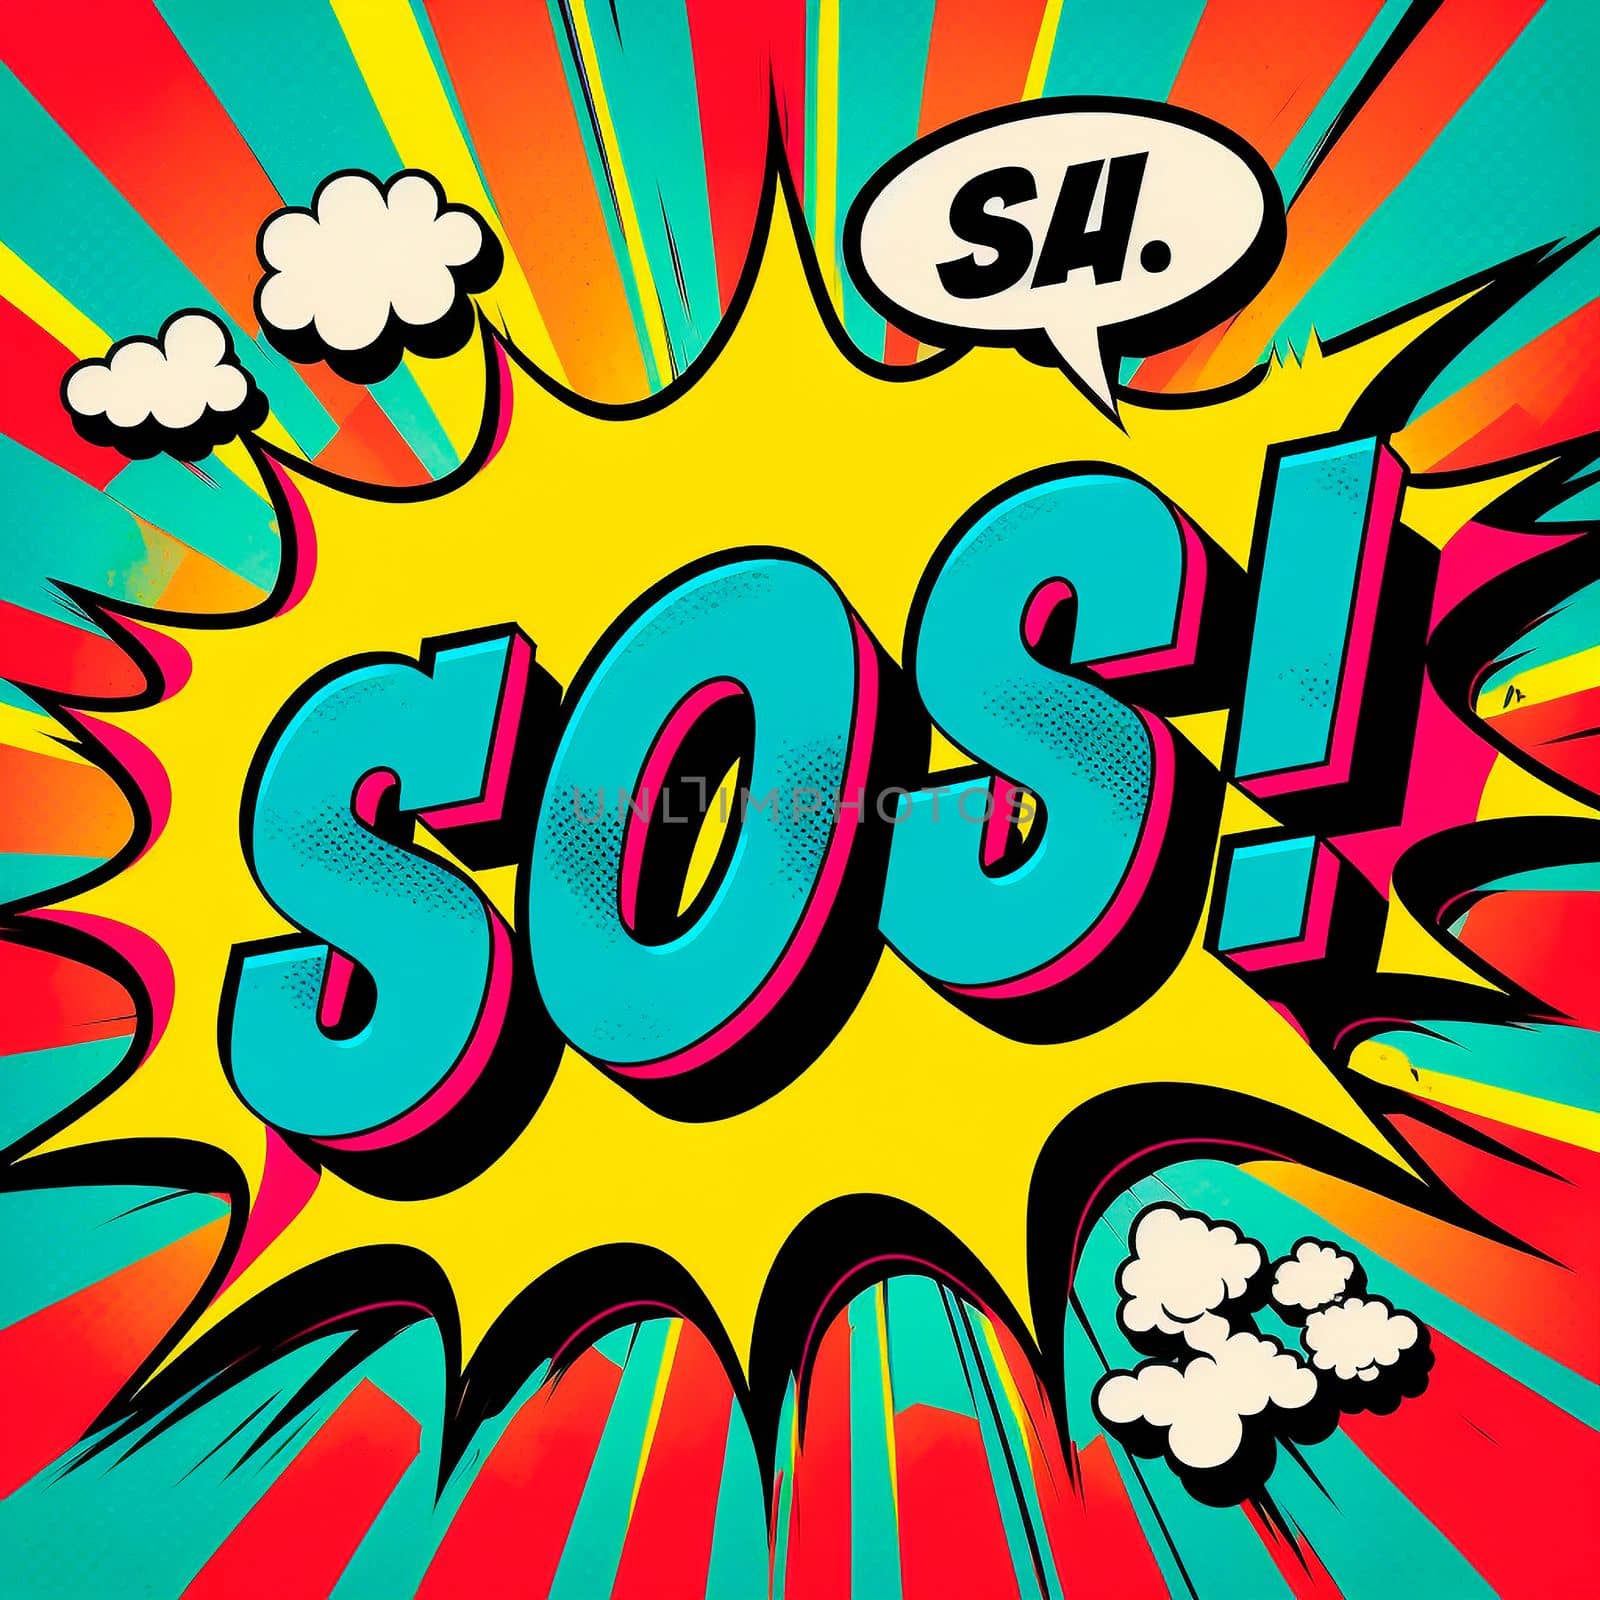 Cartoon sign of burst clouds with the word SOS. High quality illustration